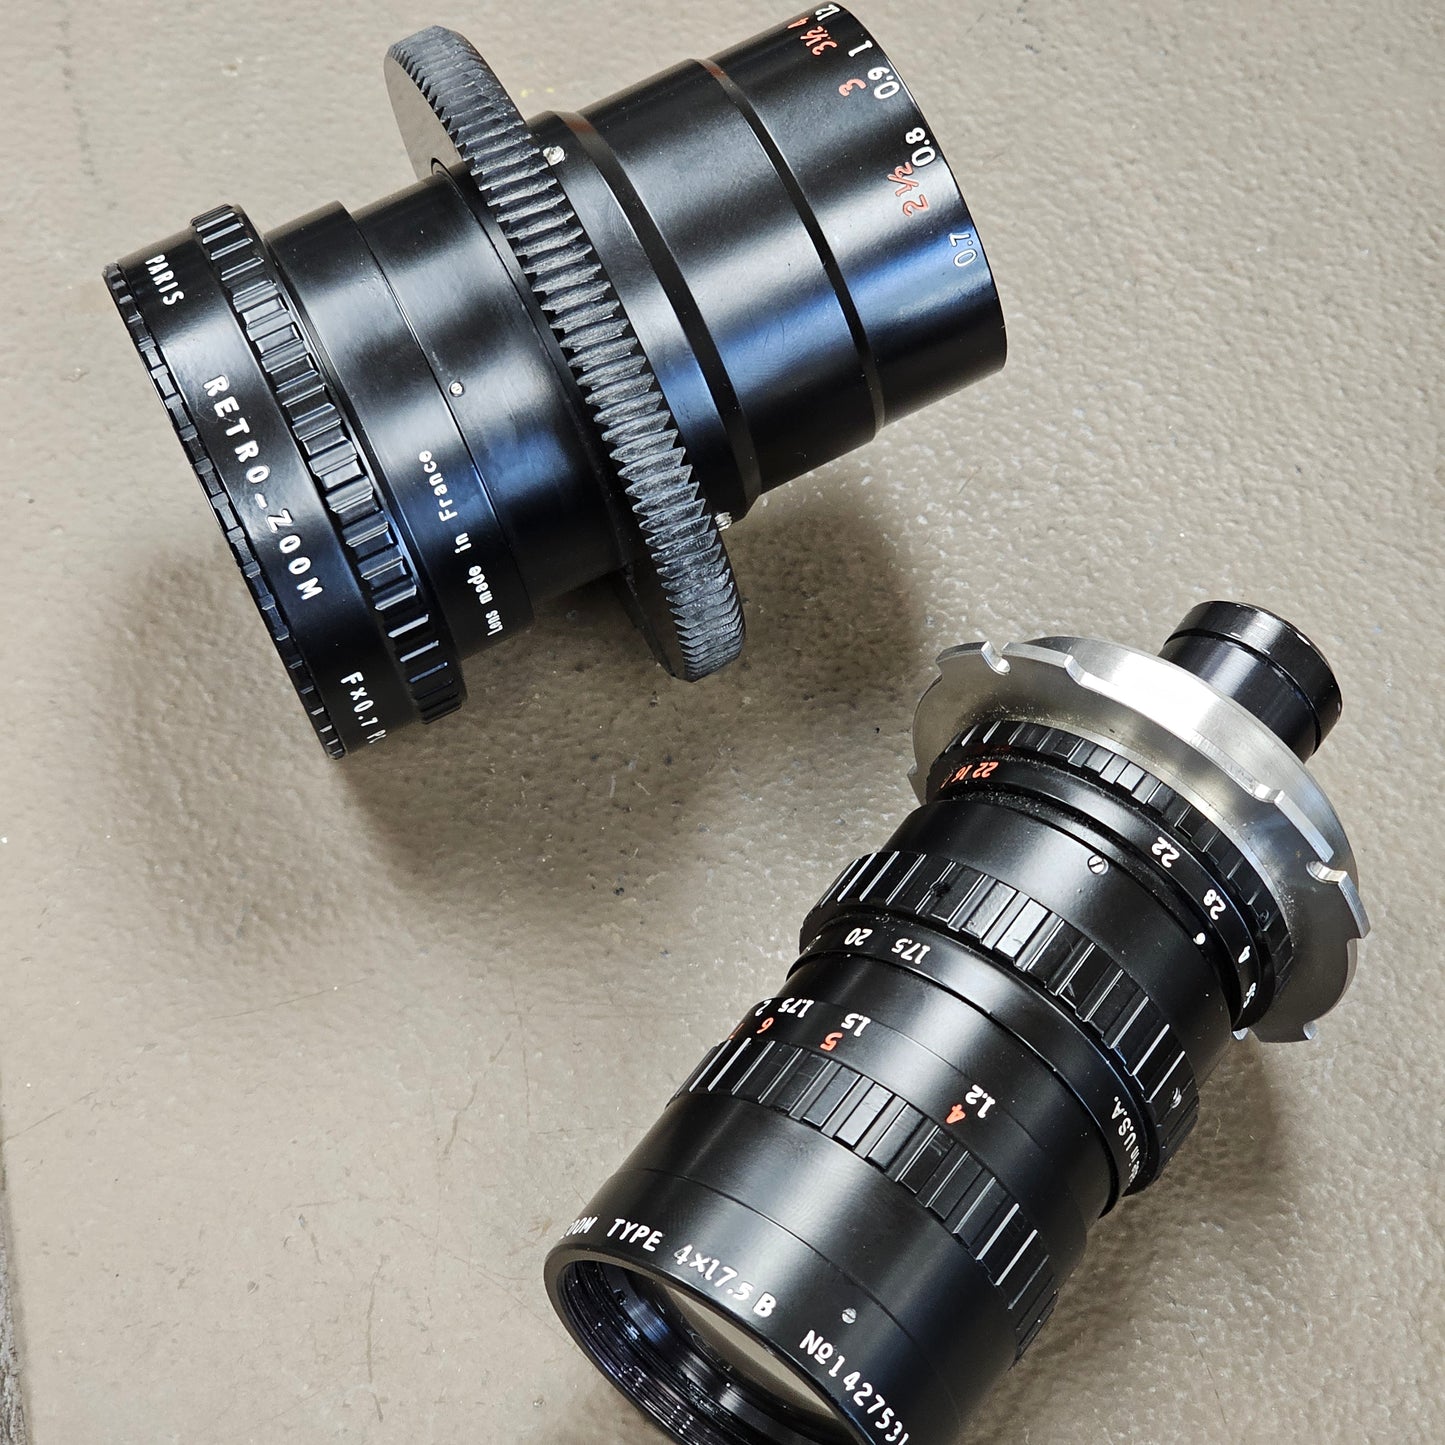 Angenieux 17.5-70mm f2.2/T2.5 Type 4x17.5B PL Mount S# 1427531 with Retro-Zoom Attachment